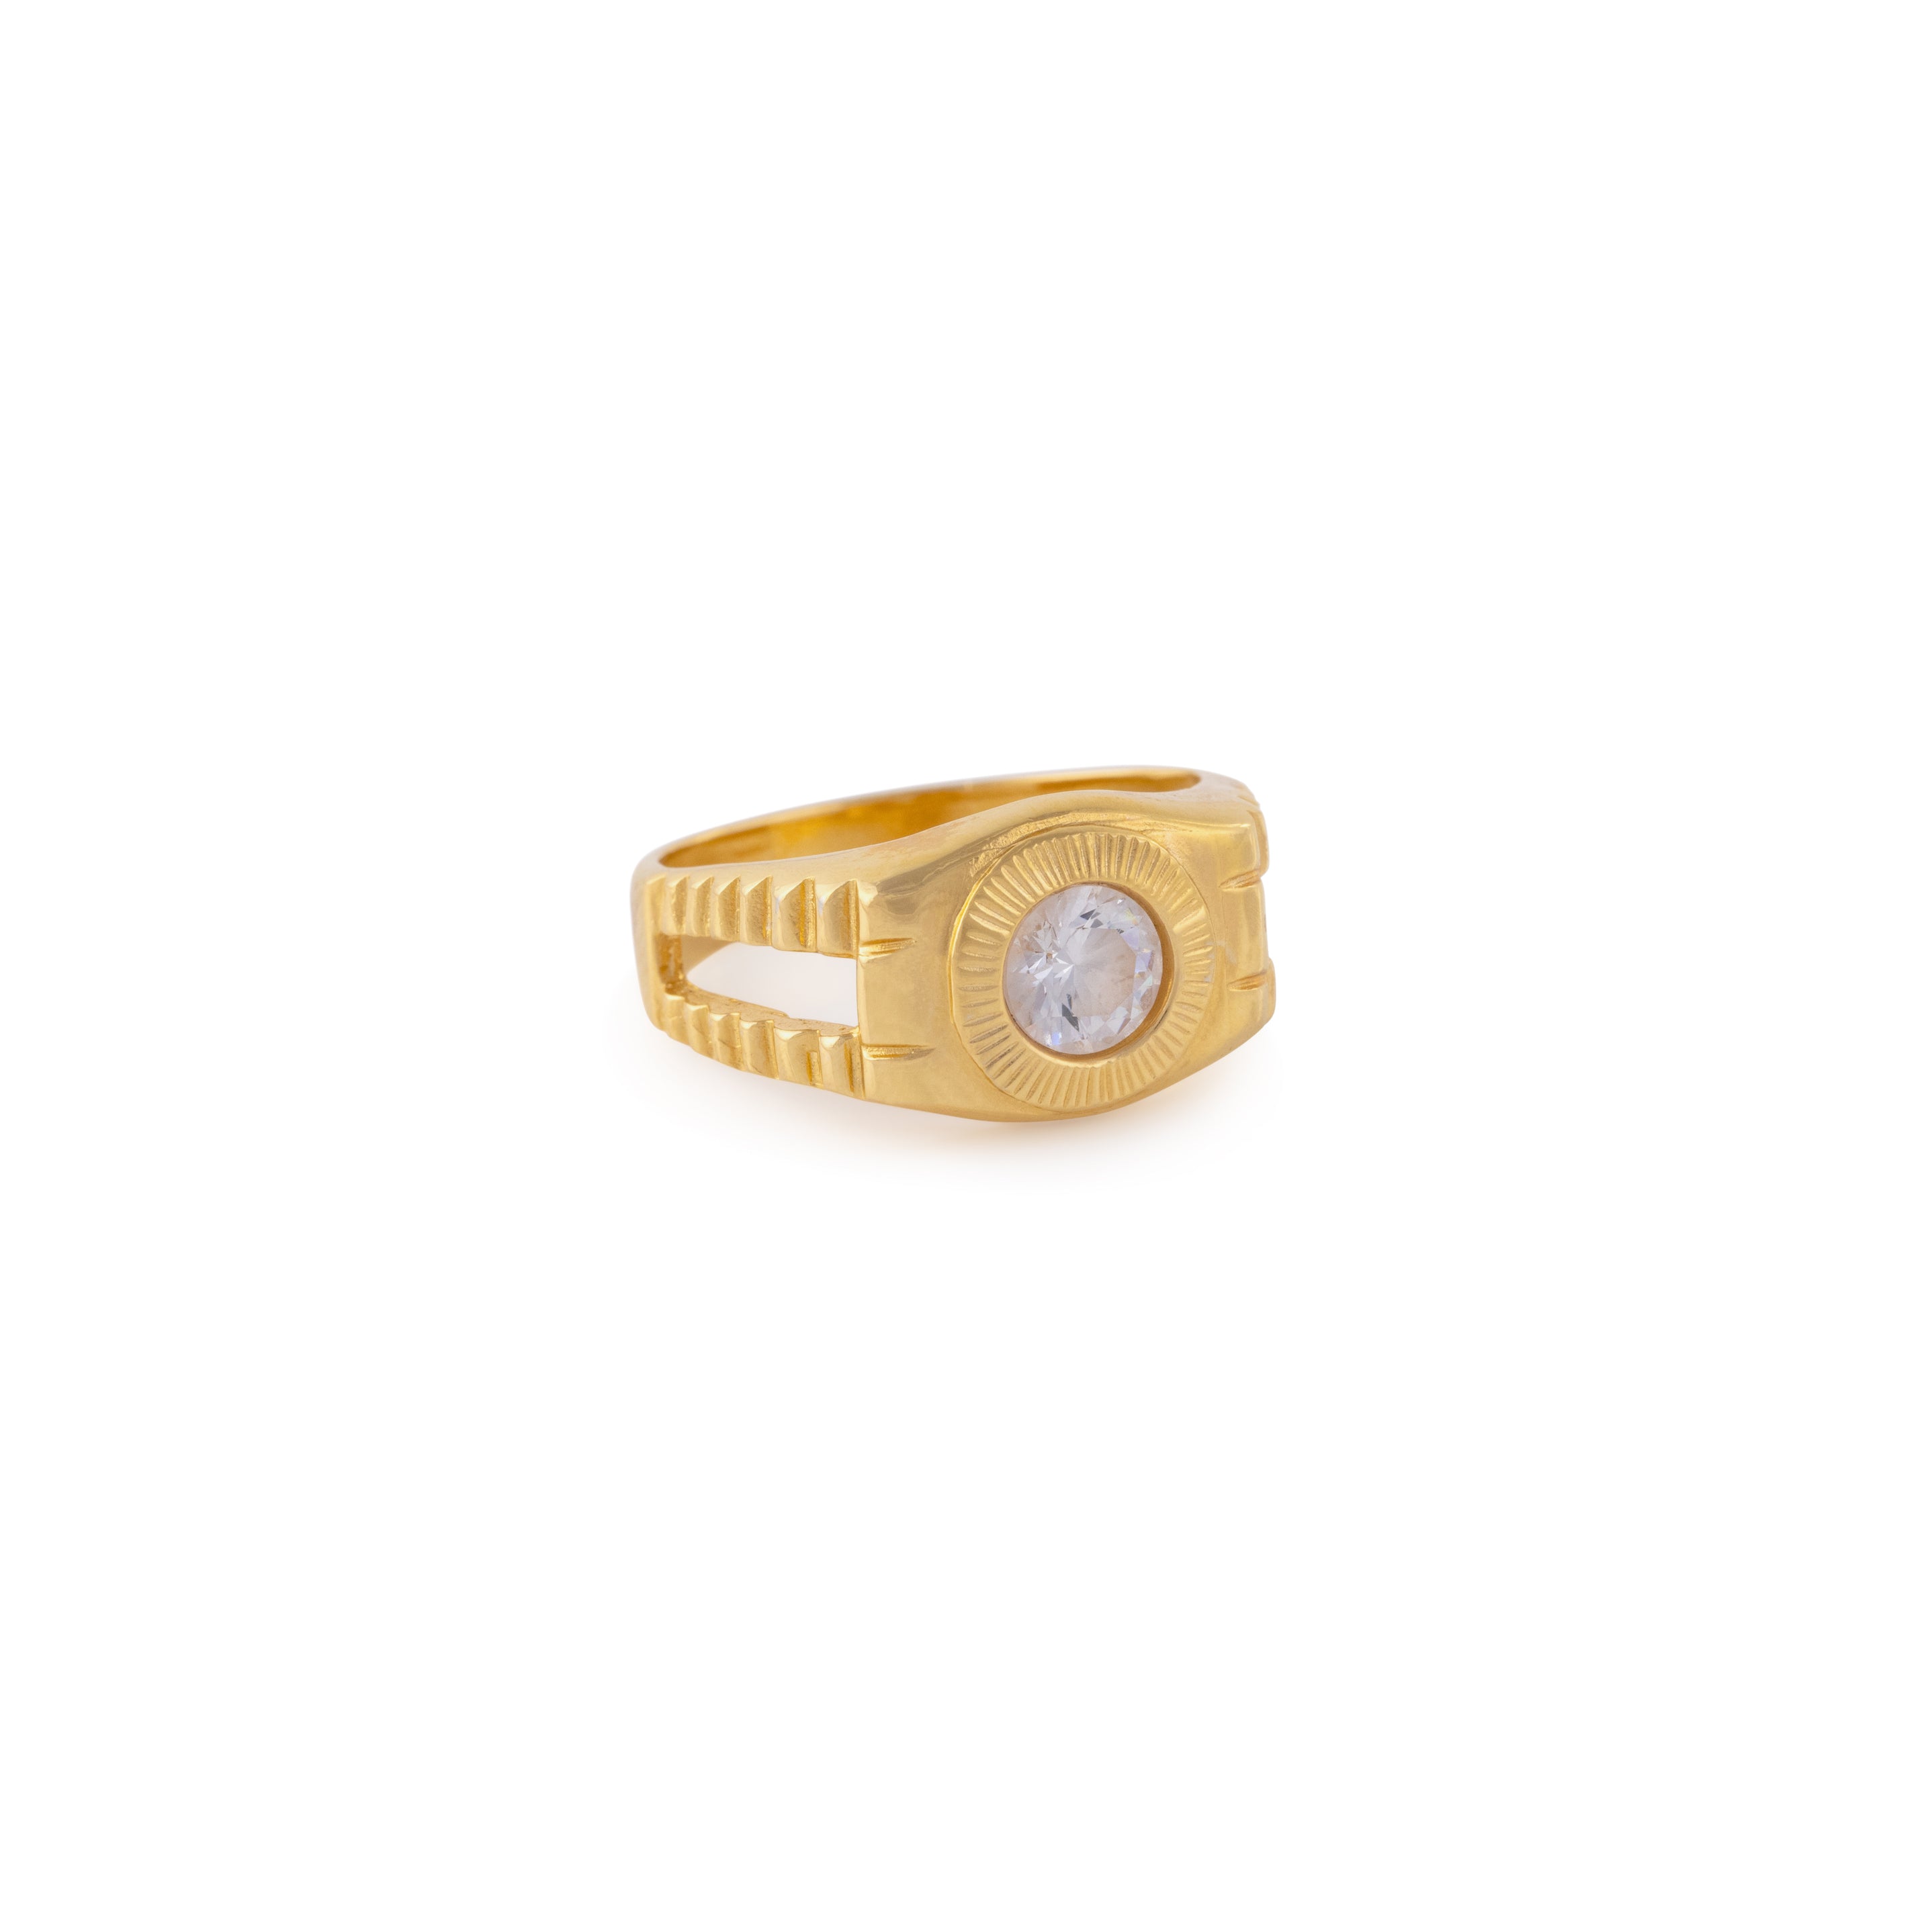 Gold Rolex style detailed ring with CZ stone setting